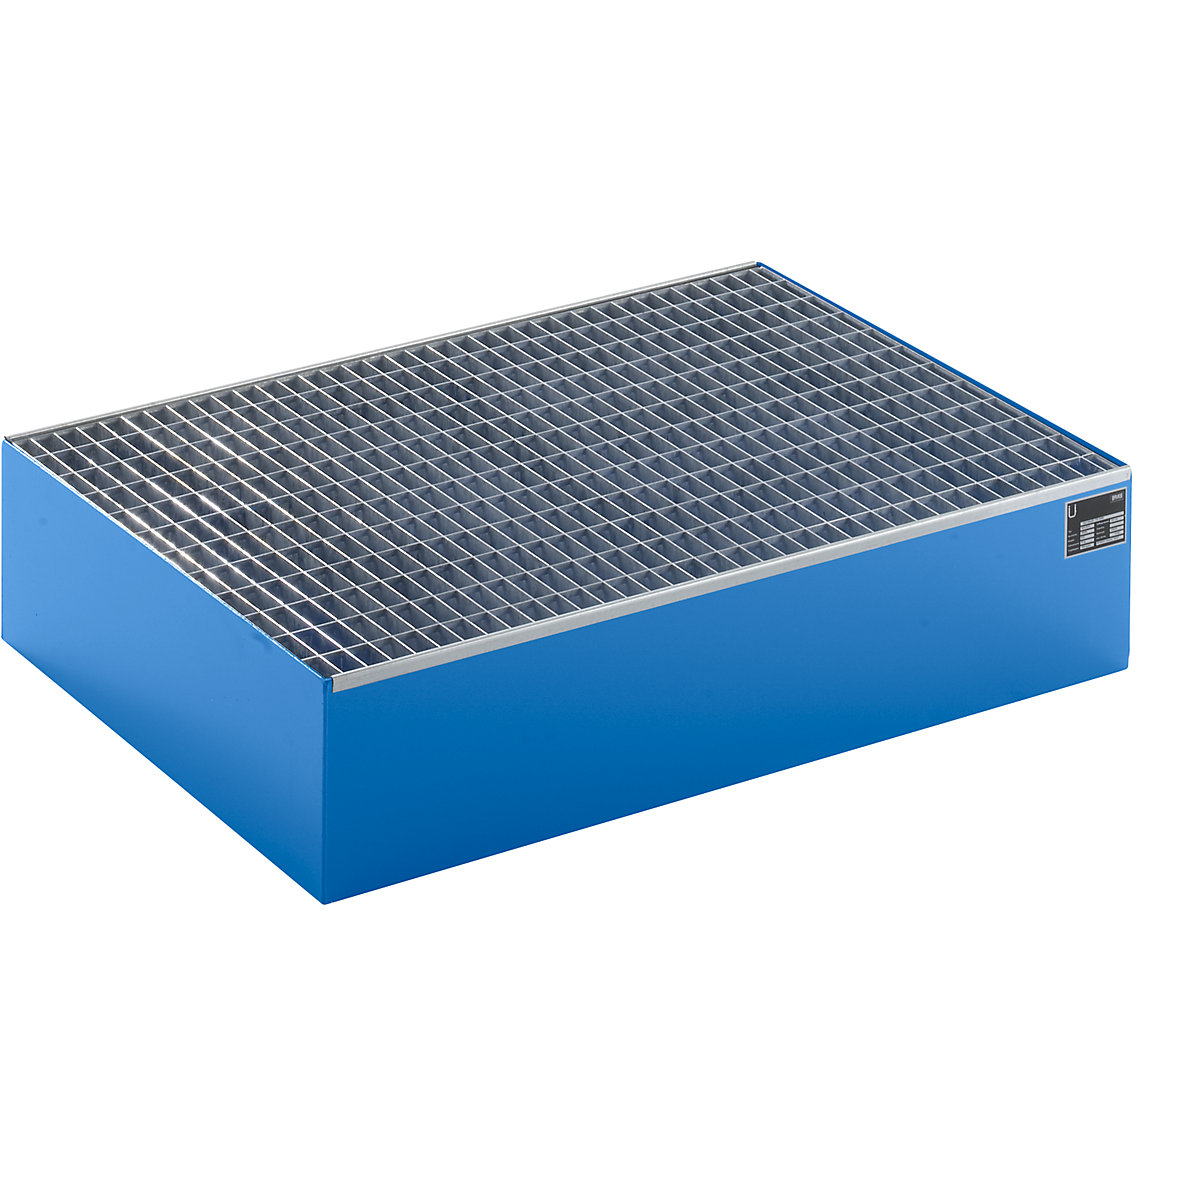 EUROKRAFTbasic – Pallet sump tray, LxWxH 1200 x 800 x 260 mm, blue RAL 5012, with grate